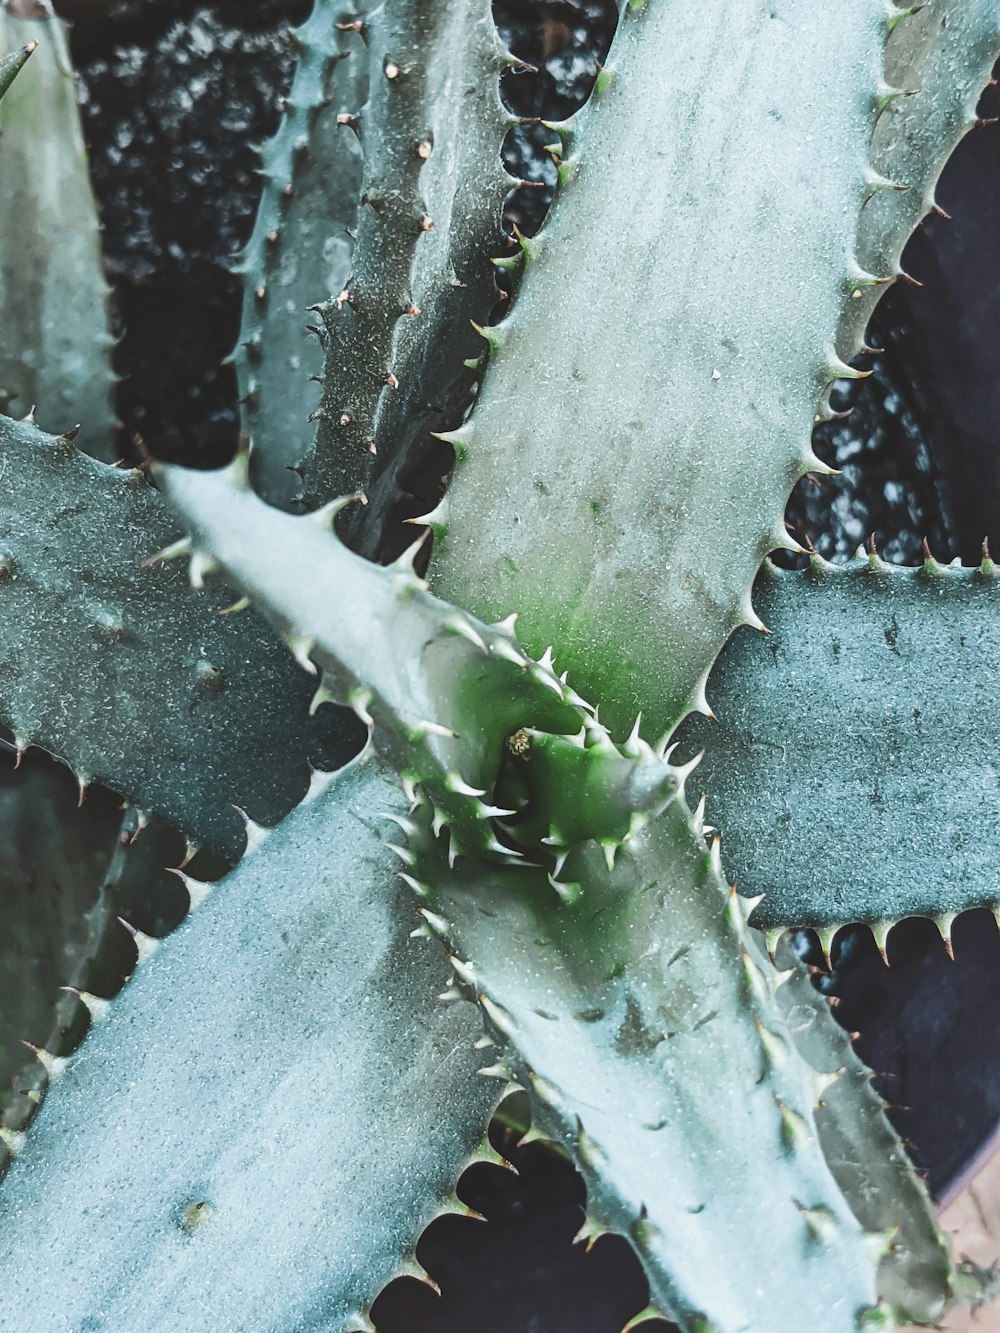 green cactus plant with water droplets